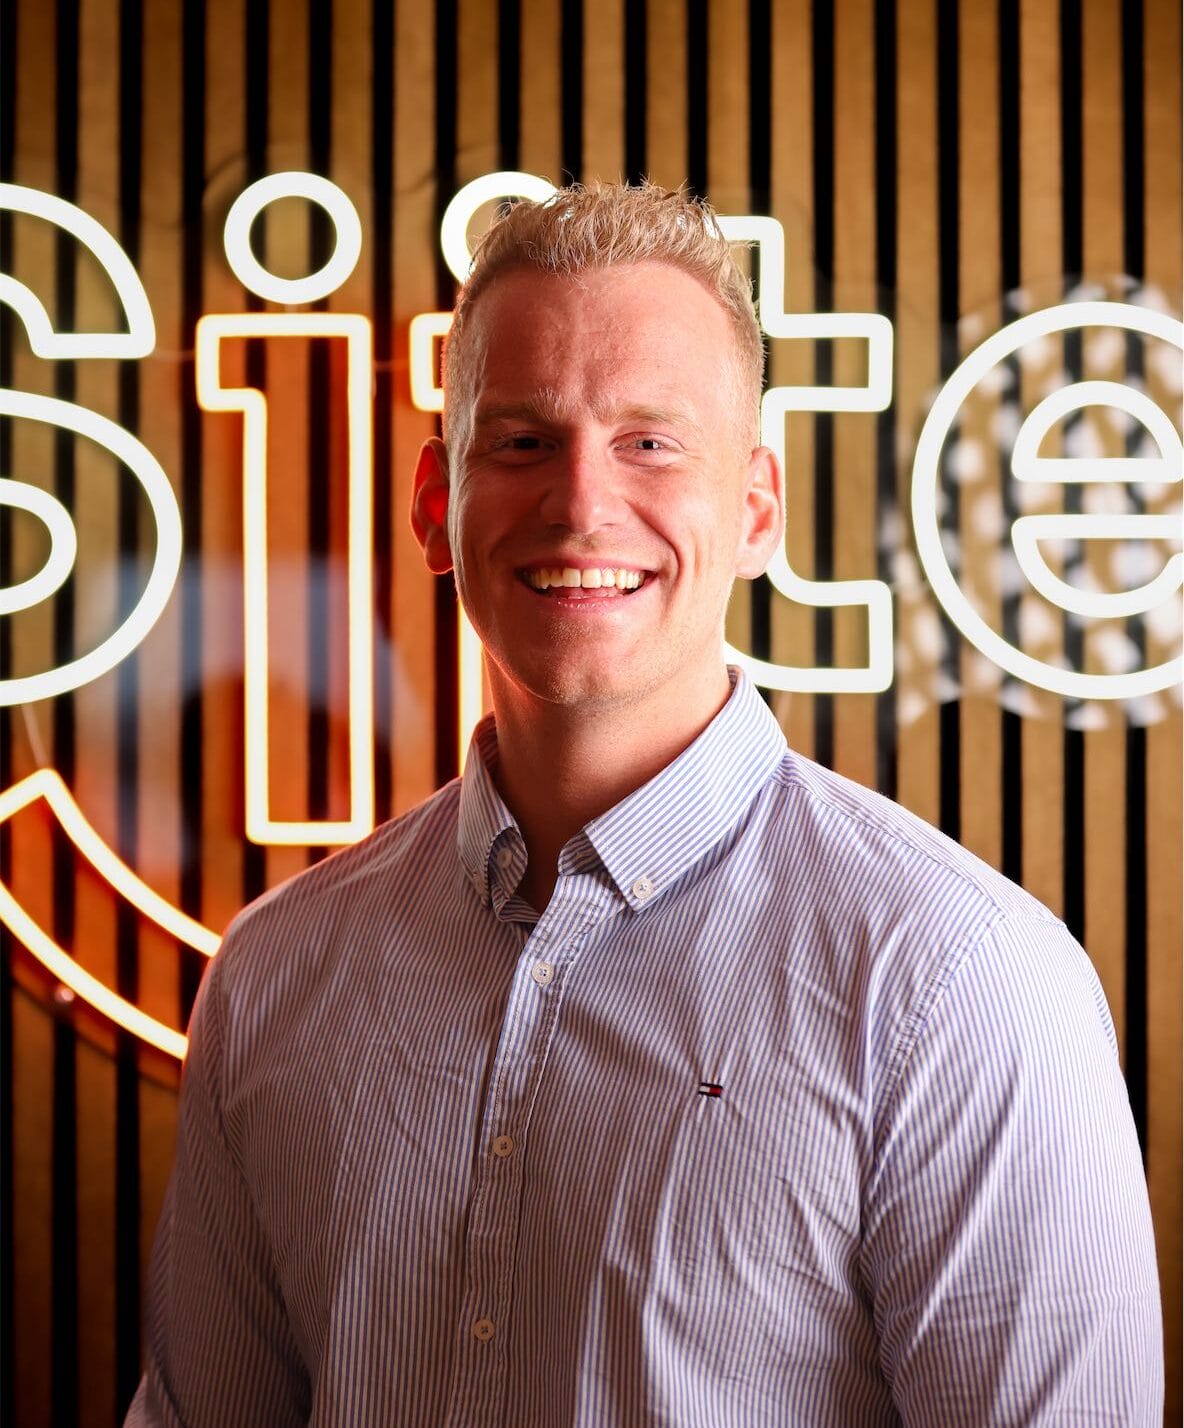 Smiling businessman in front of neon sign.